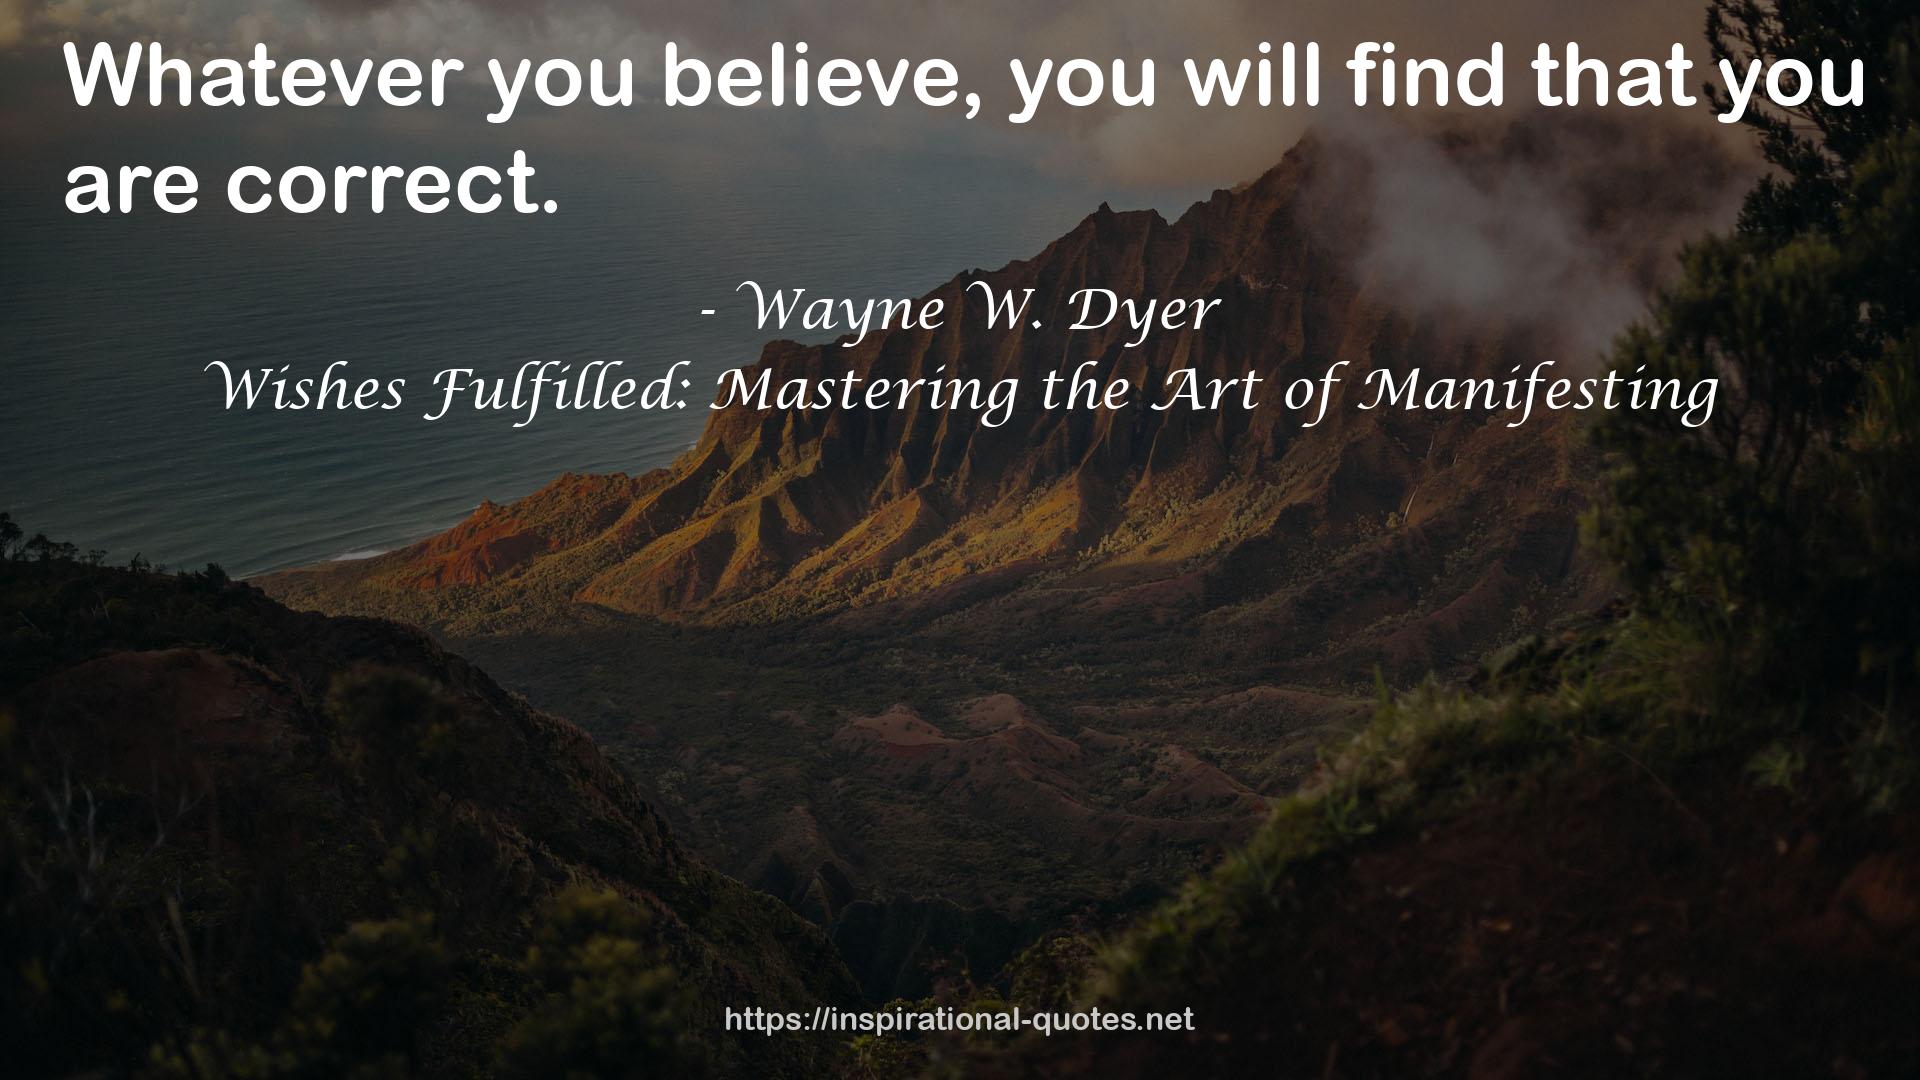 Wishes Fulfilled: Mastering the Art of Manifesting QUOTES